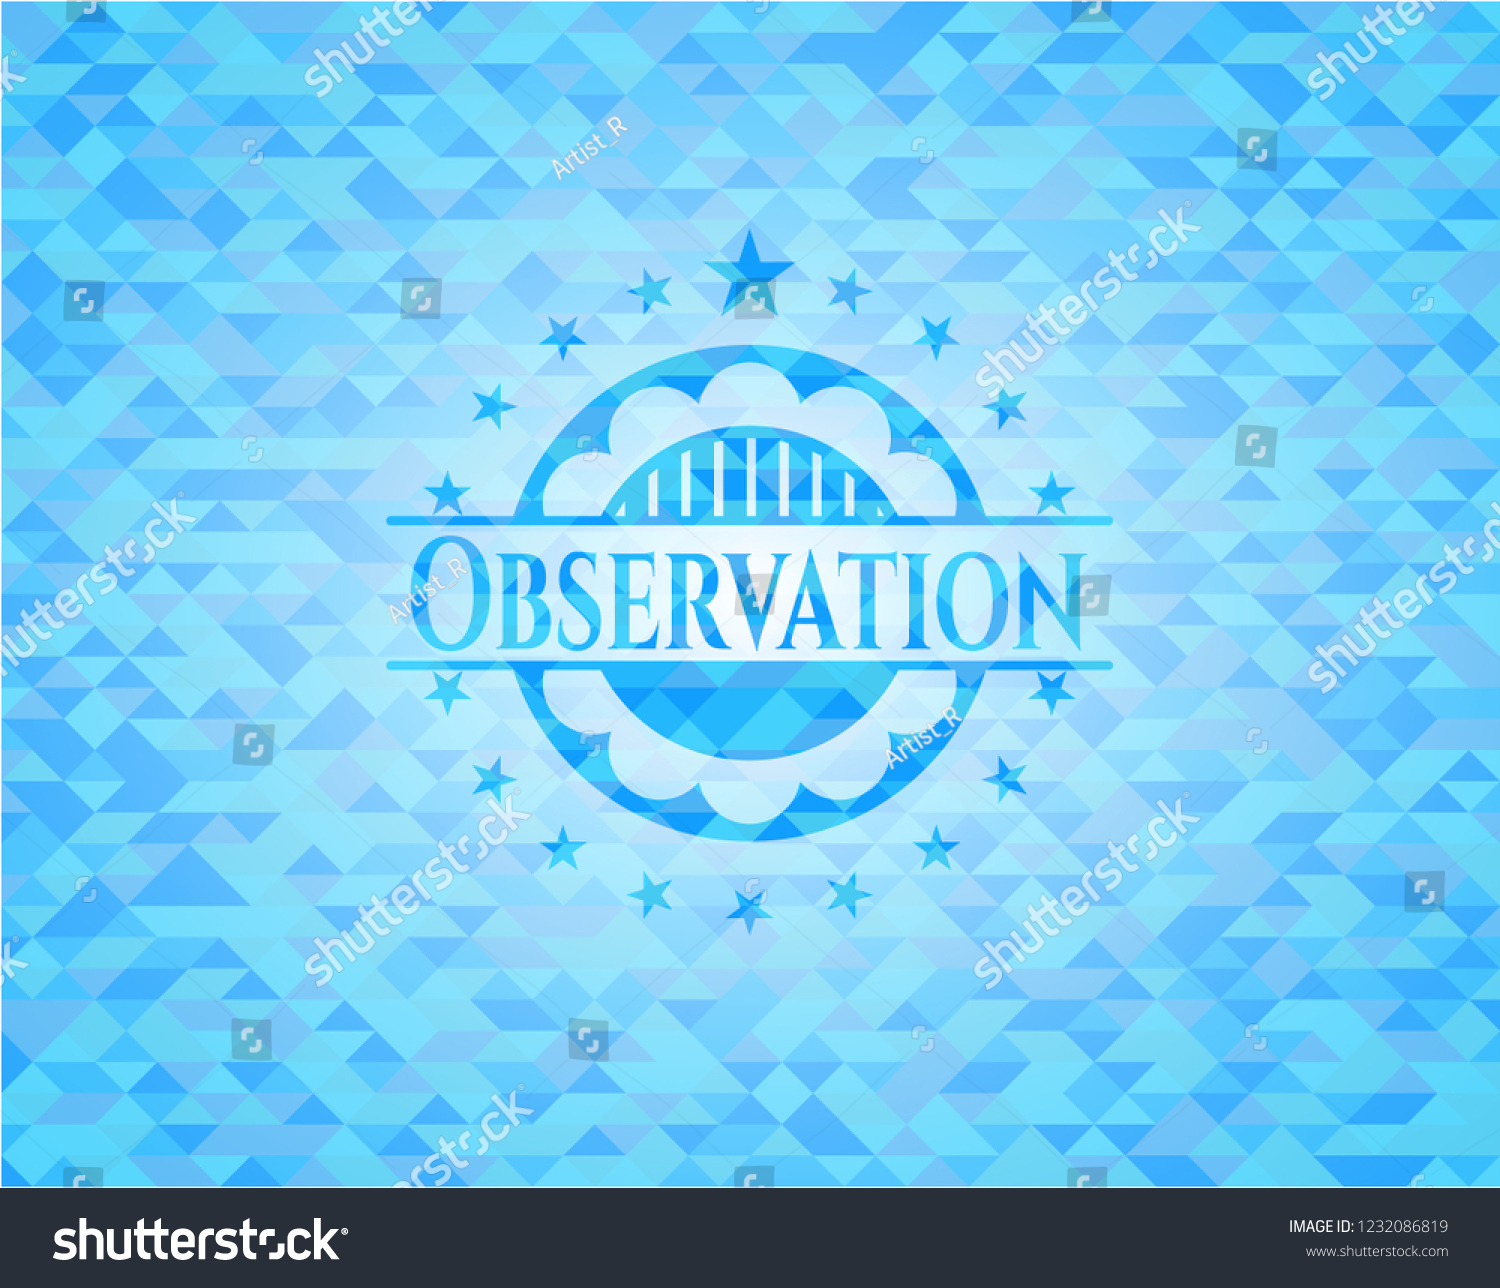 Observation Sky Blue Emblem Mosaic Background Abstract Stock Image